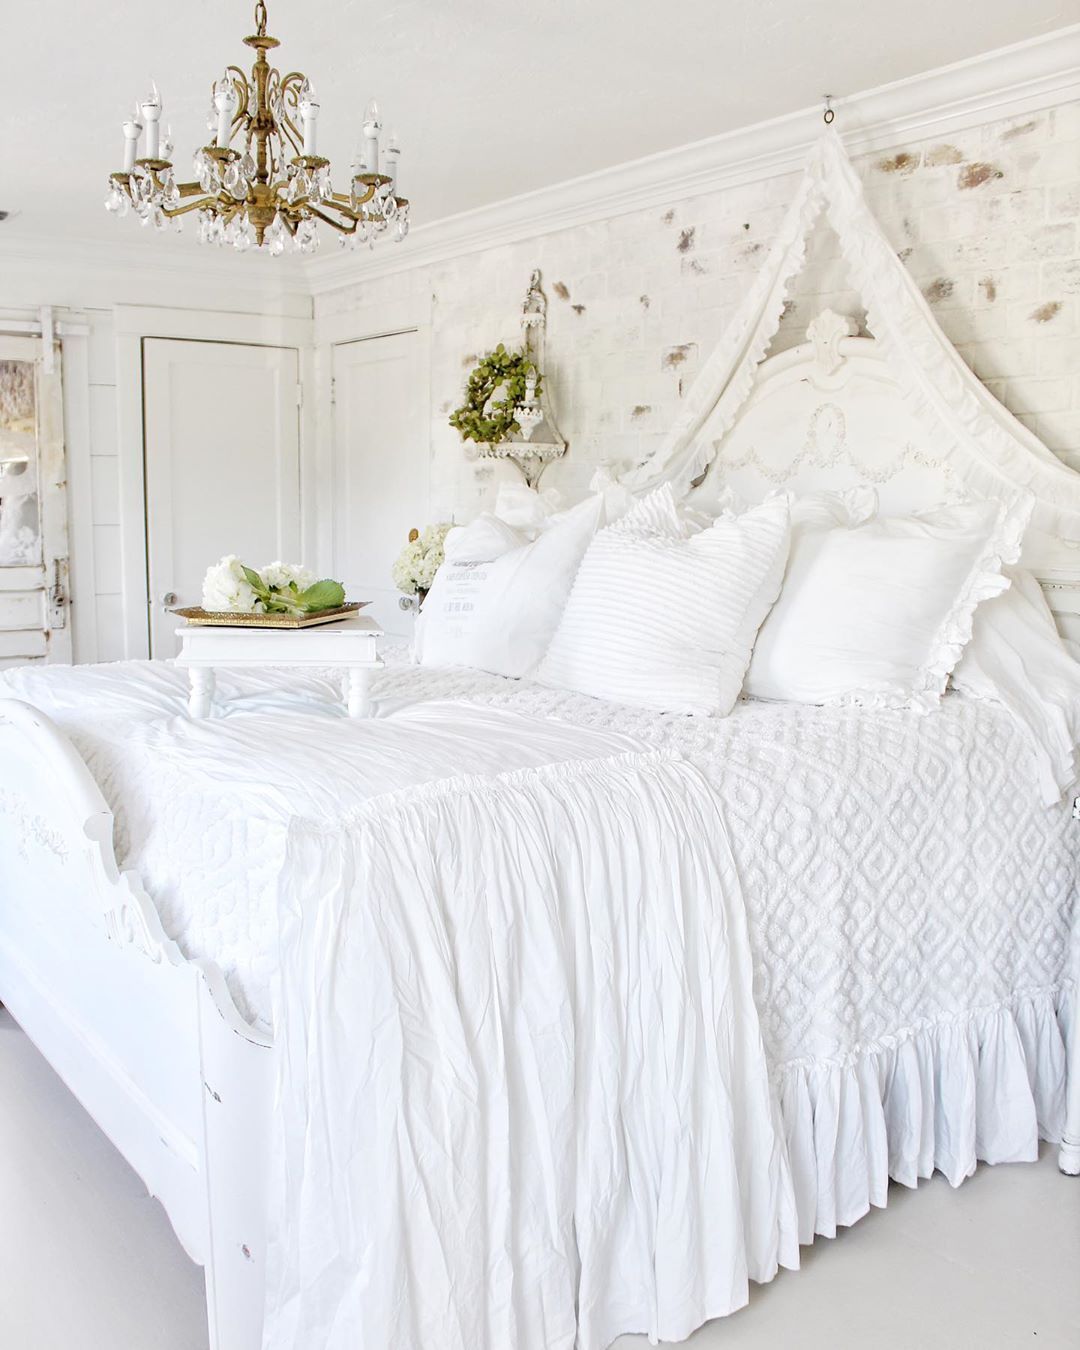 French country bedroom with white bedspread via @simplyfrenchmarket